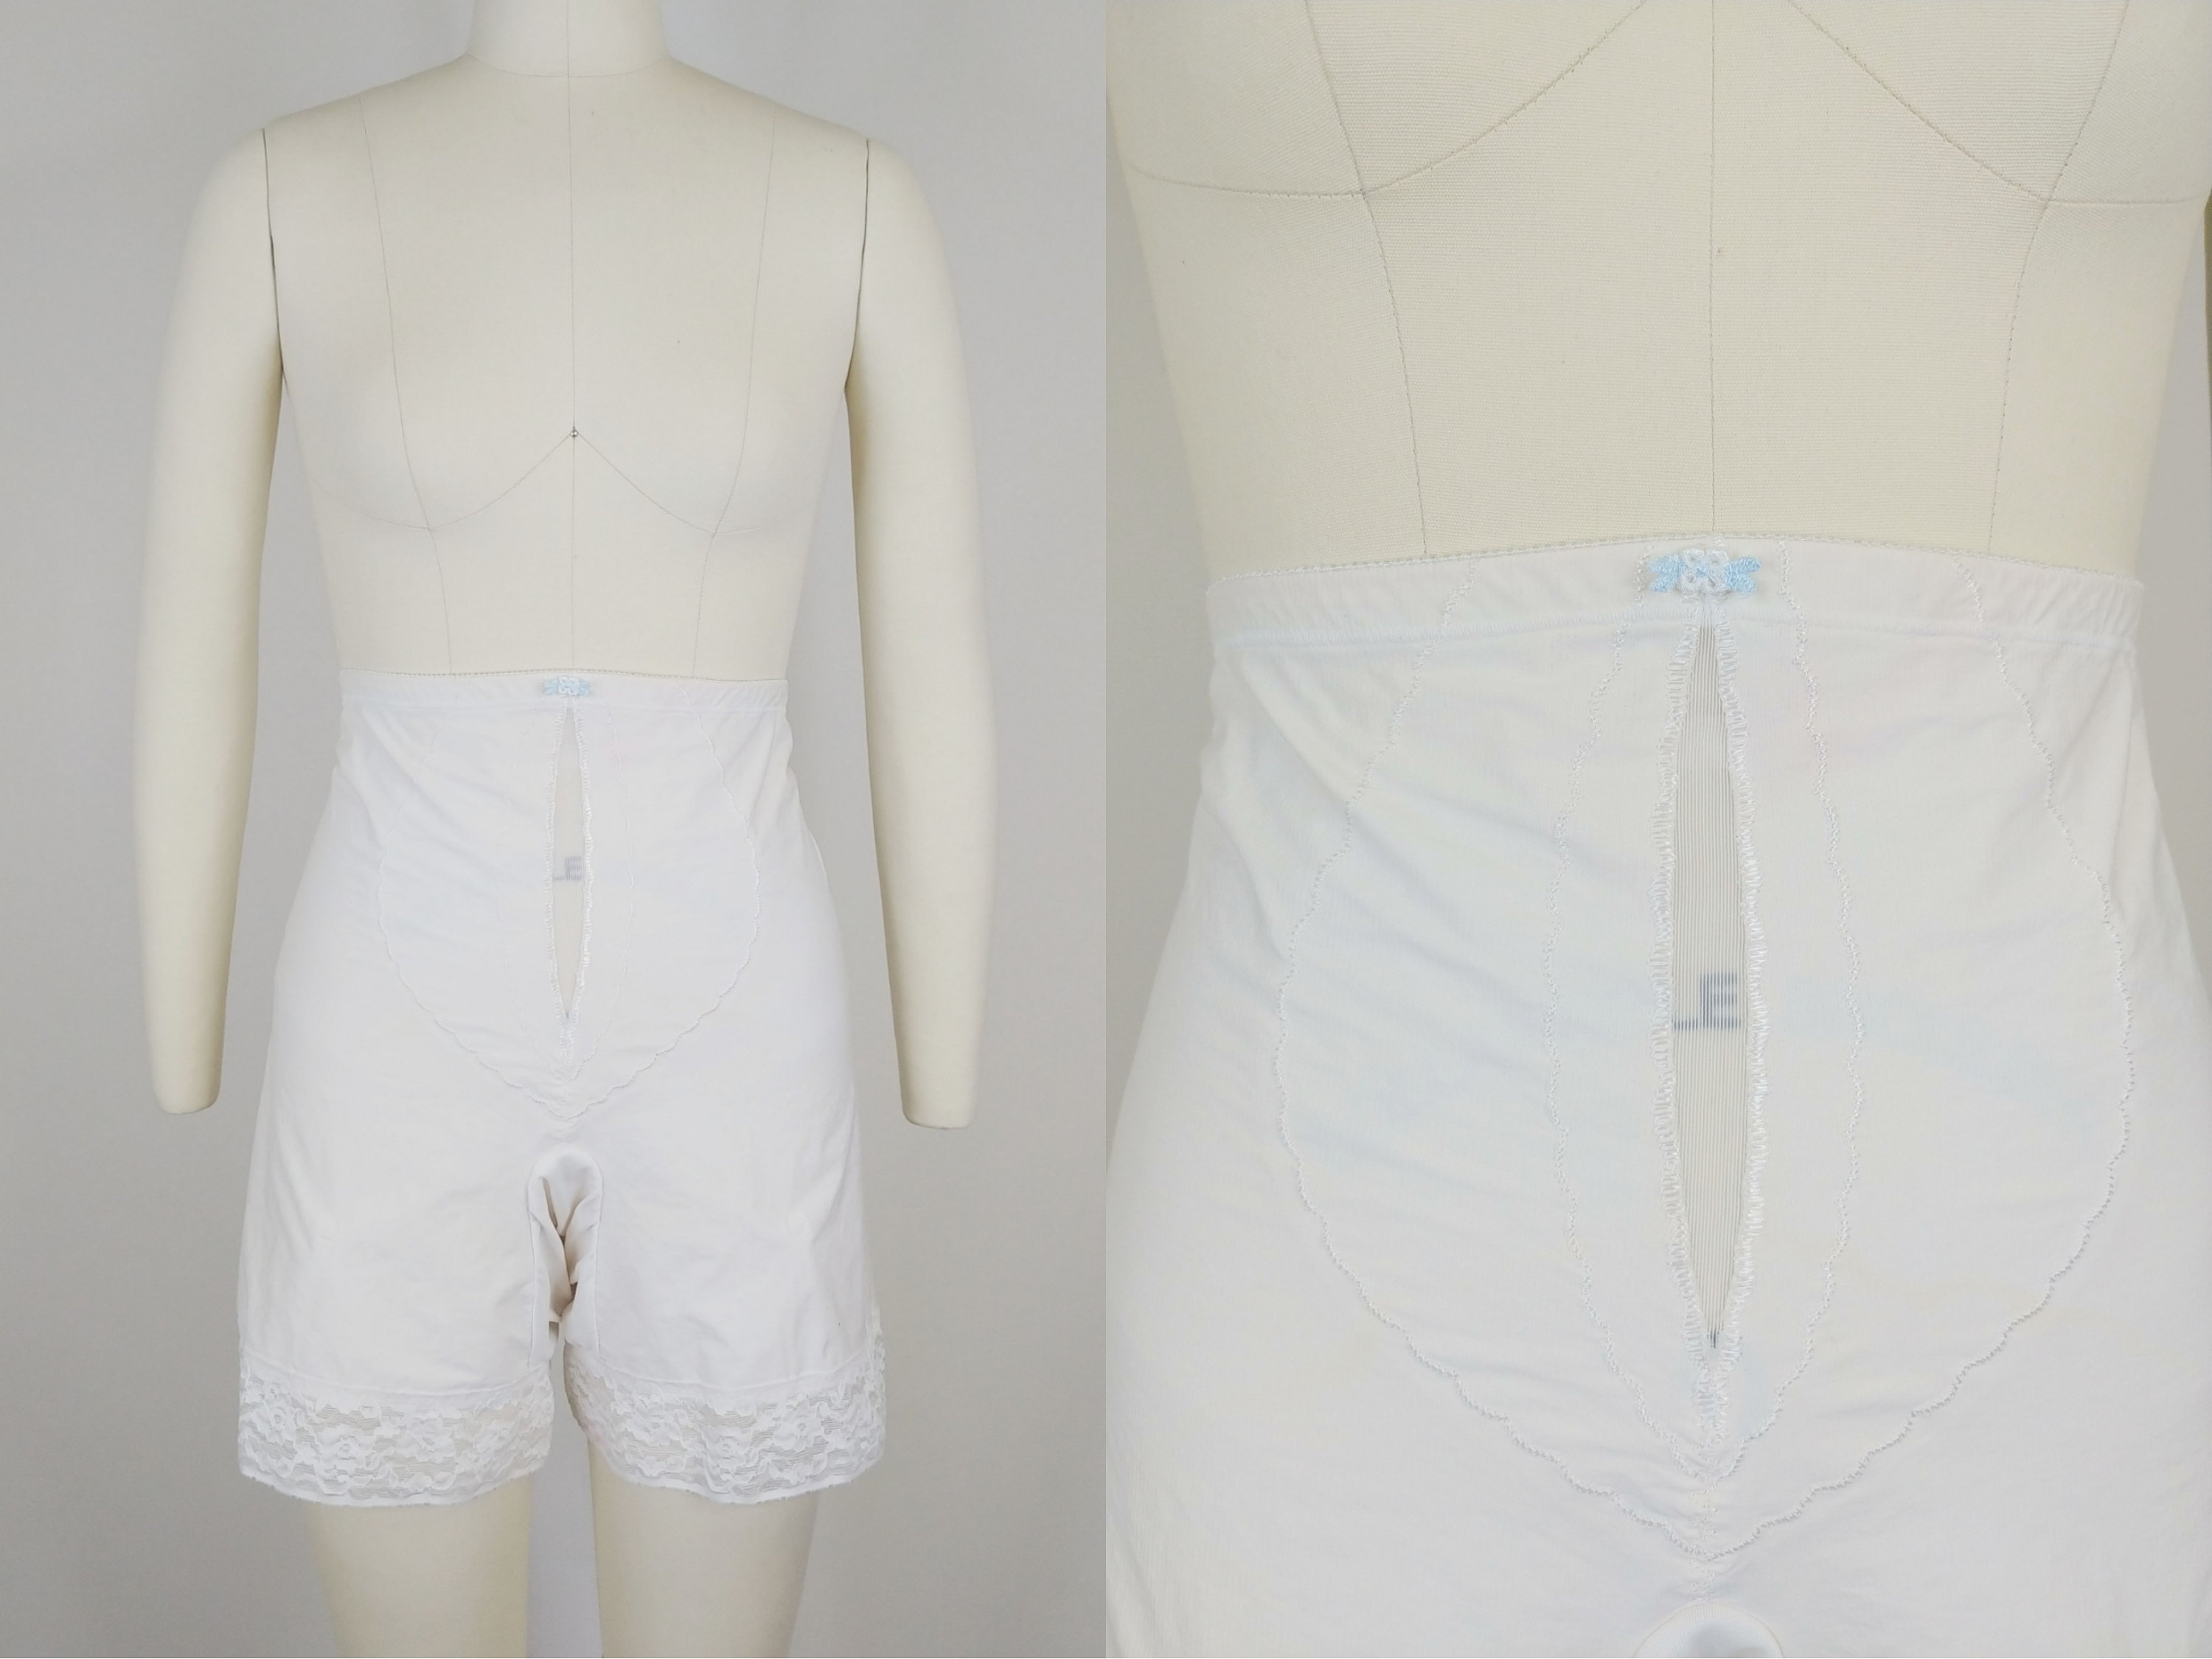 Midcentury Shaping Girdle-garter Belt-white Lace-spandex-new Old Stock-small  Waist Cincher-lingerie-corset-shapewear-50s-60s Vintage 